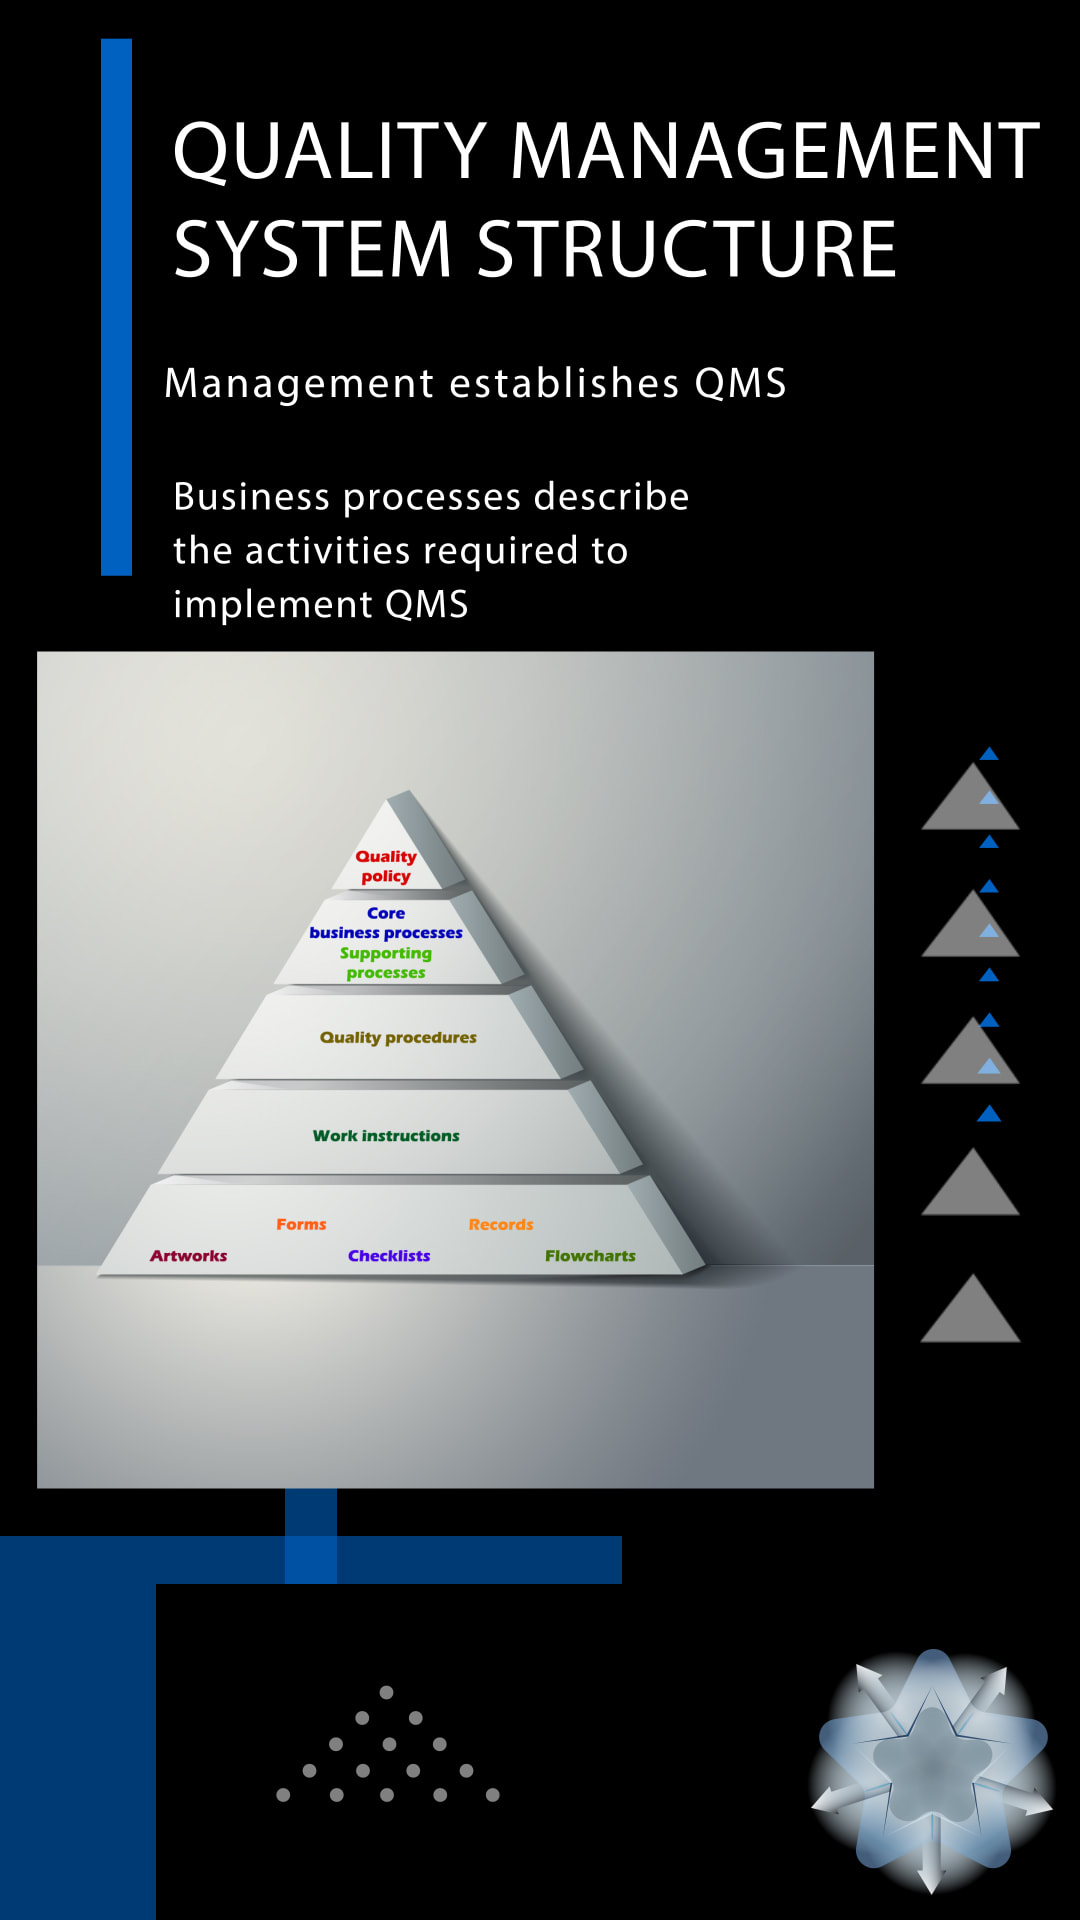 Activities required to implement QMS